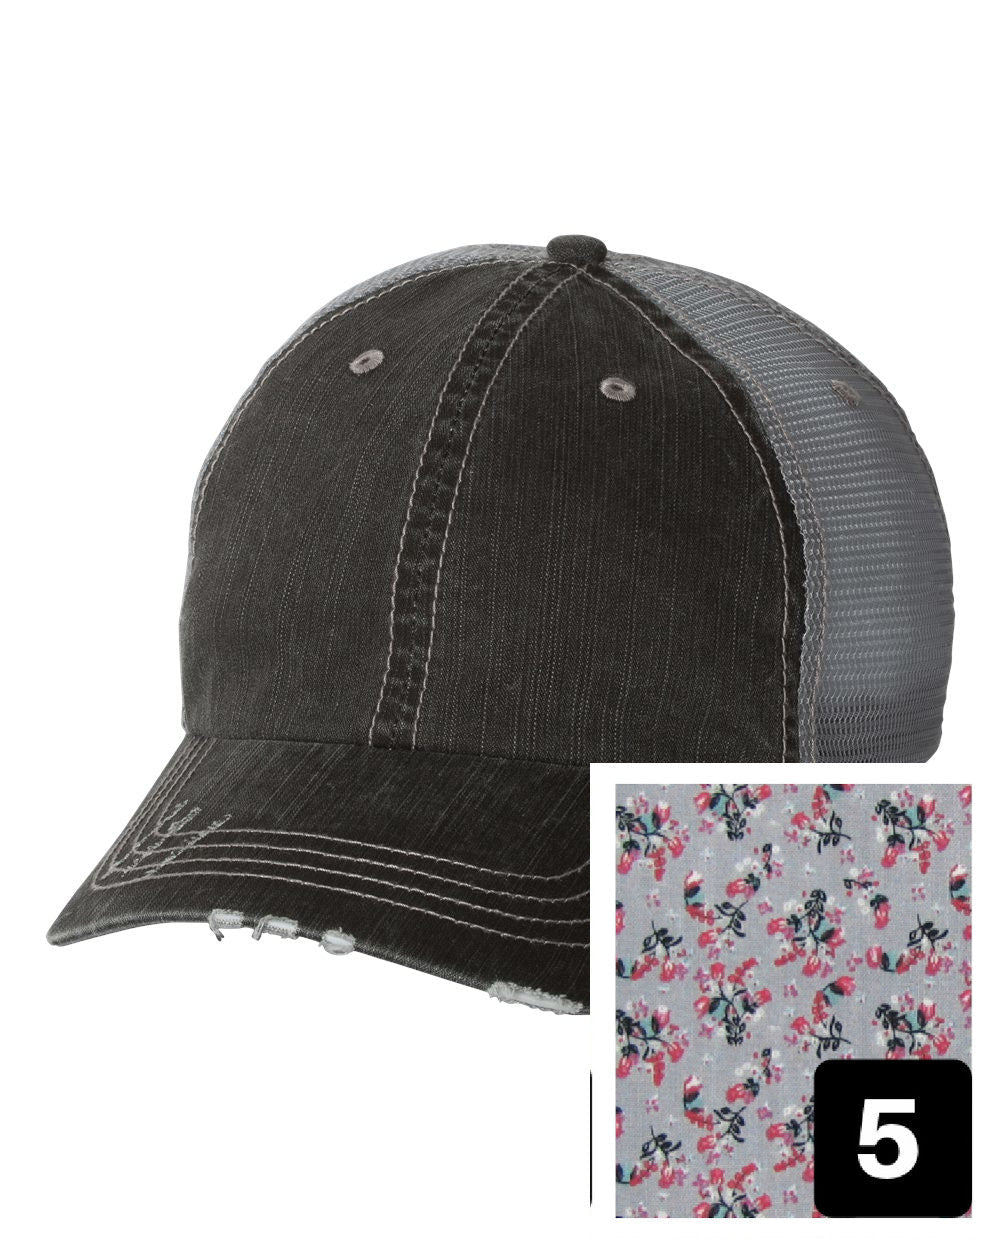 gray distressed trucker hat with purple and pink floral fabric state of Massachusetts